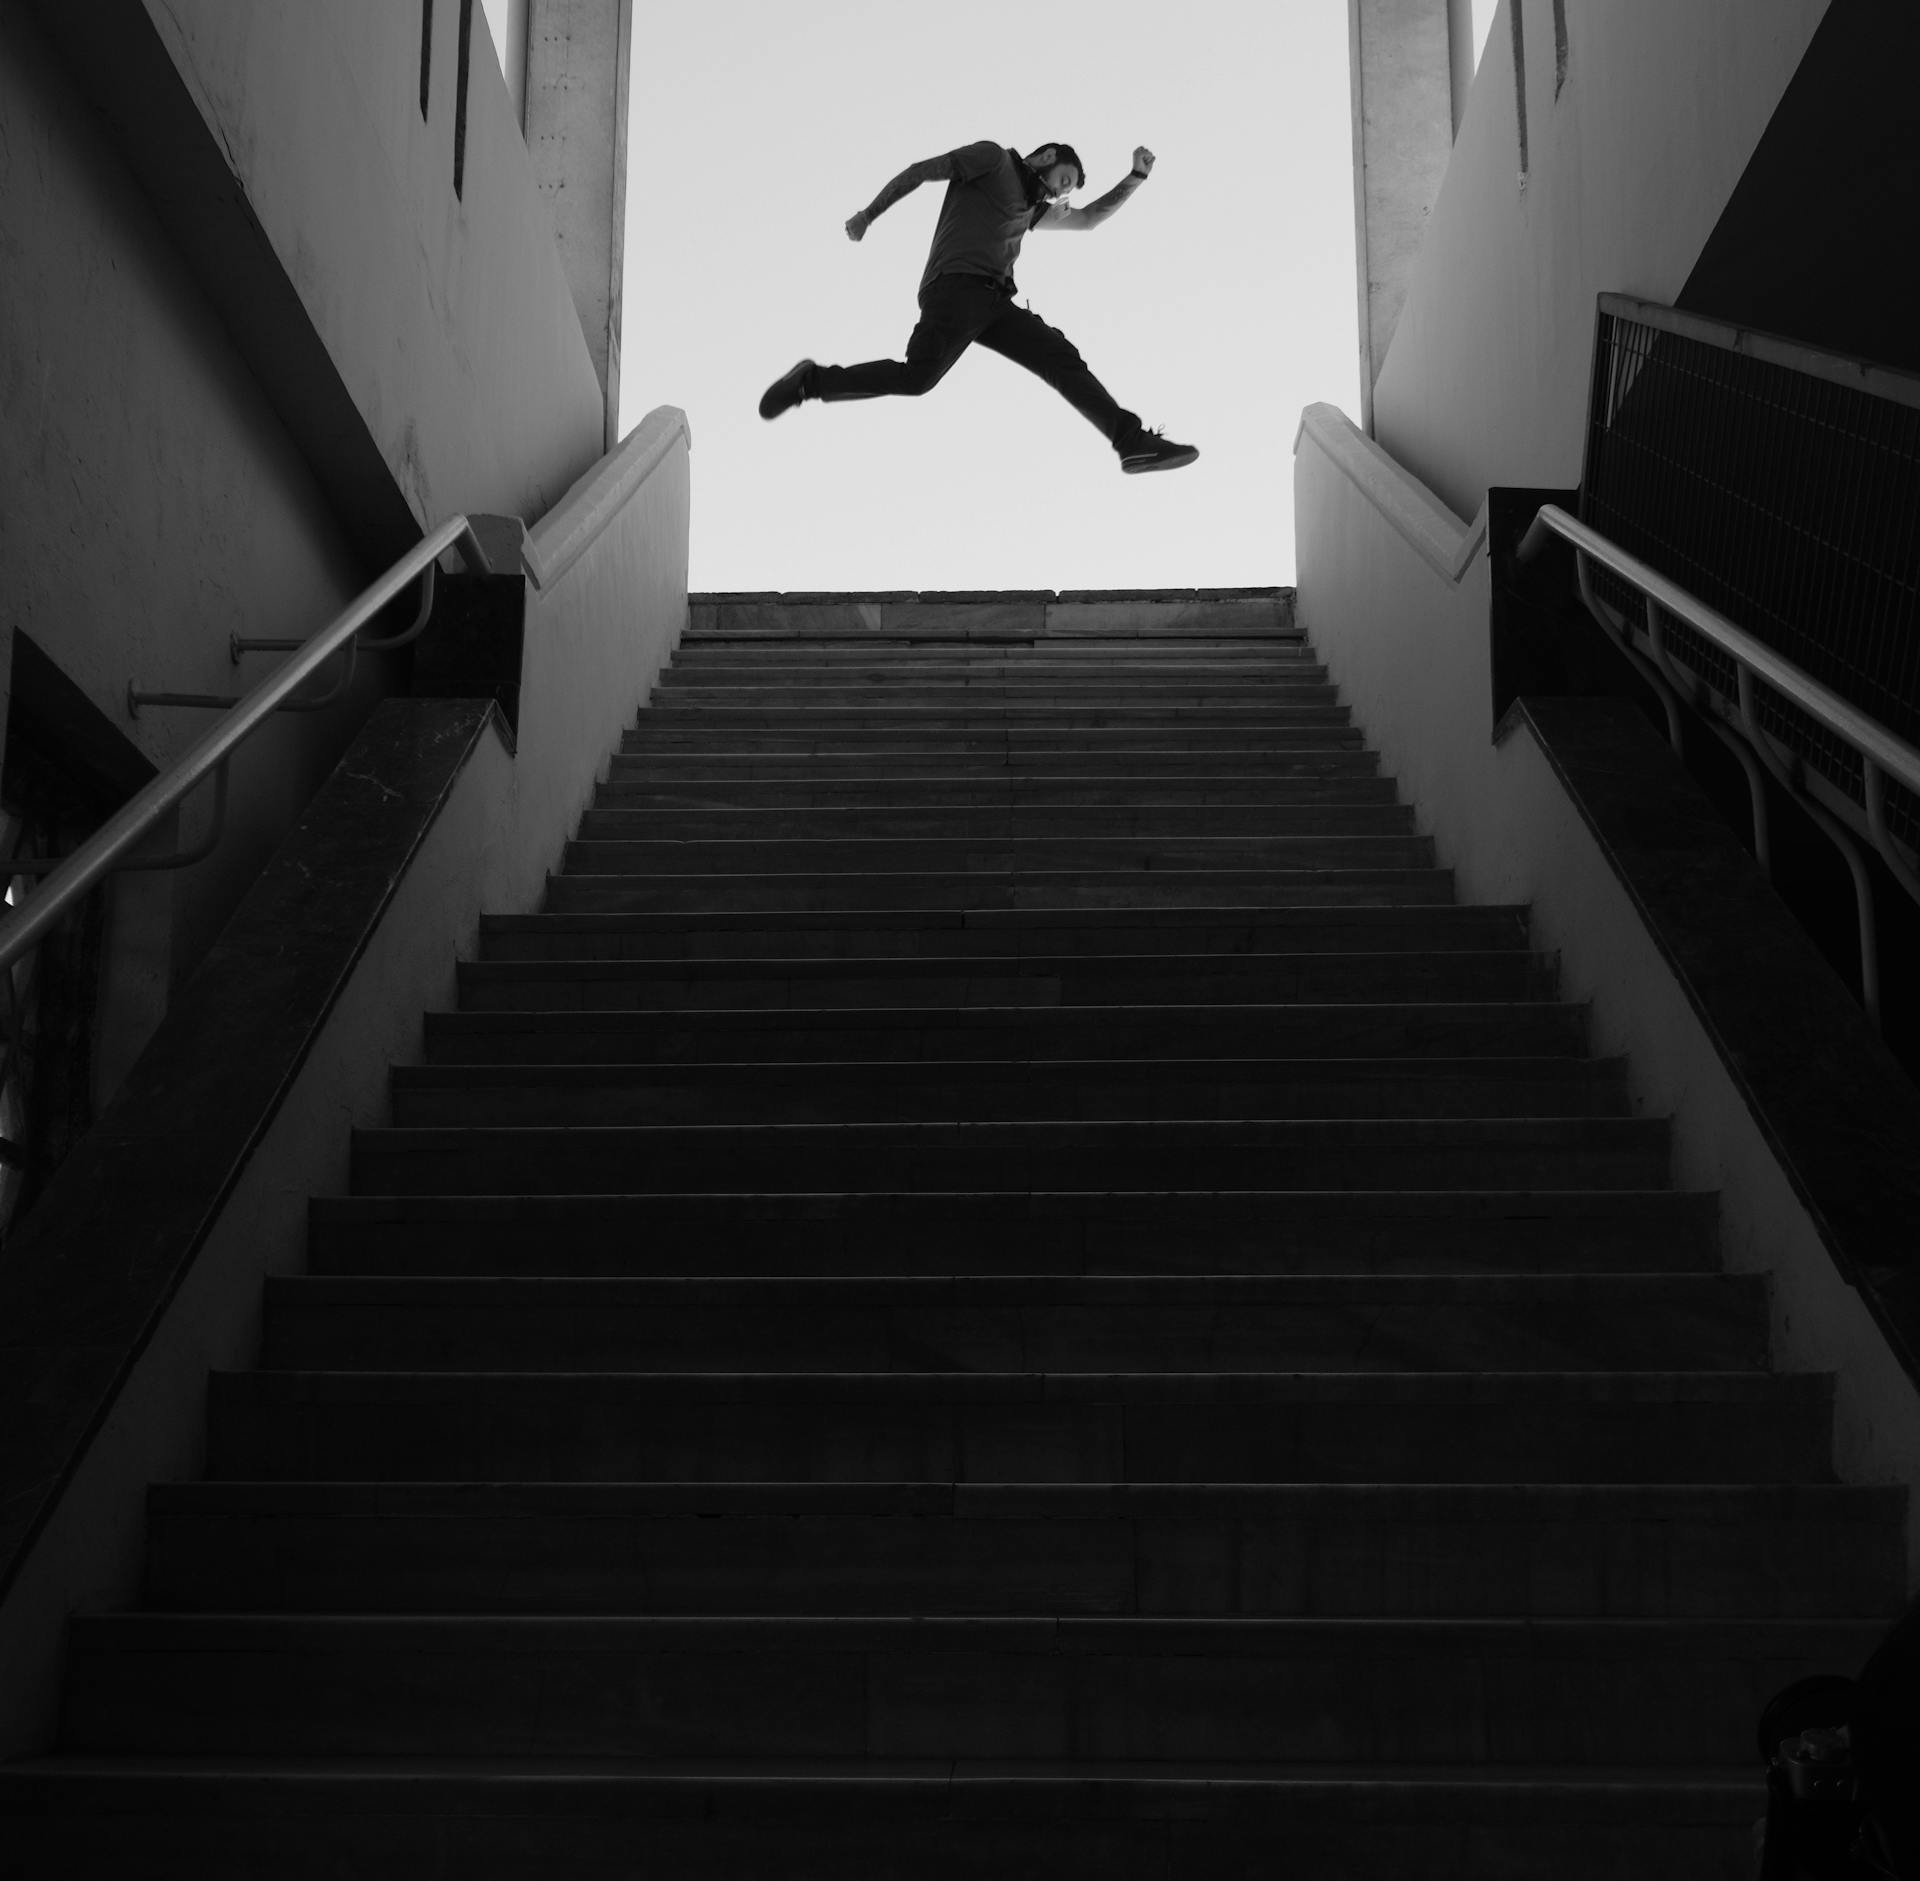 Man Jumping On Top Of A Stairs